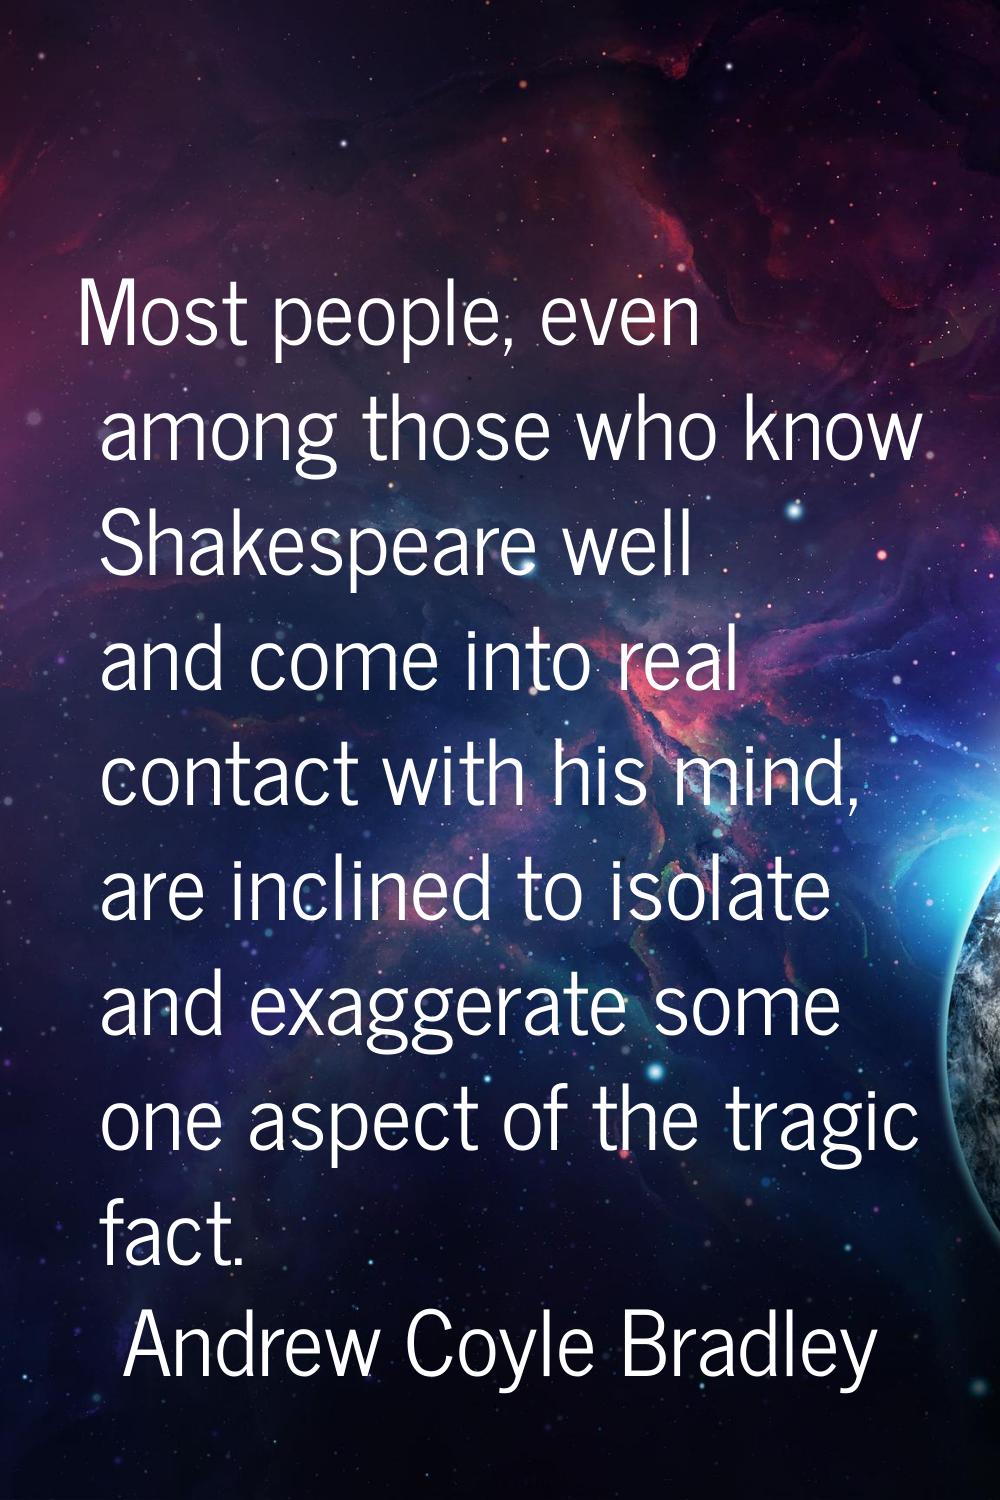 Most people, even among those who know Shakespeare well and come into real contact with his mind, a